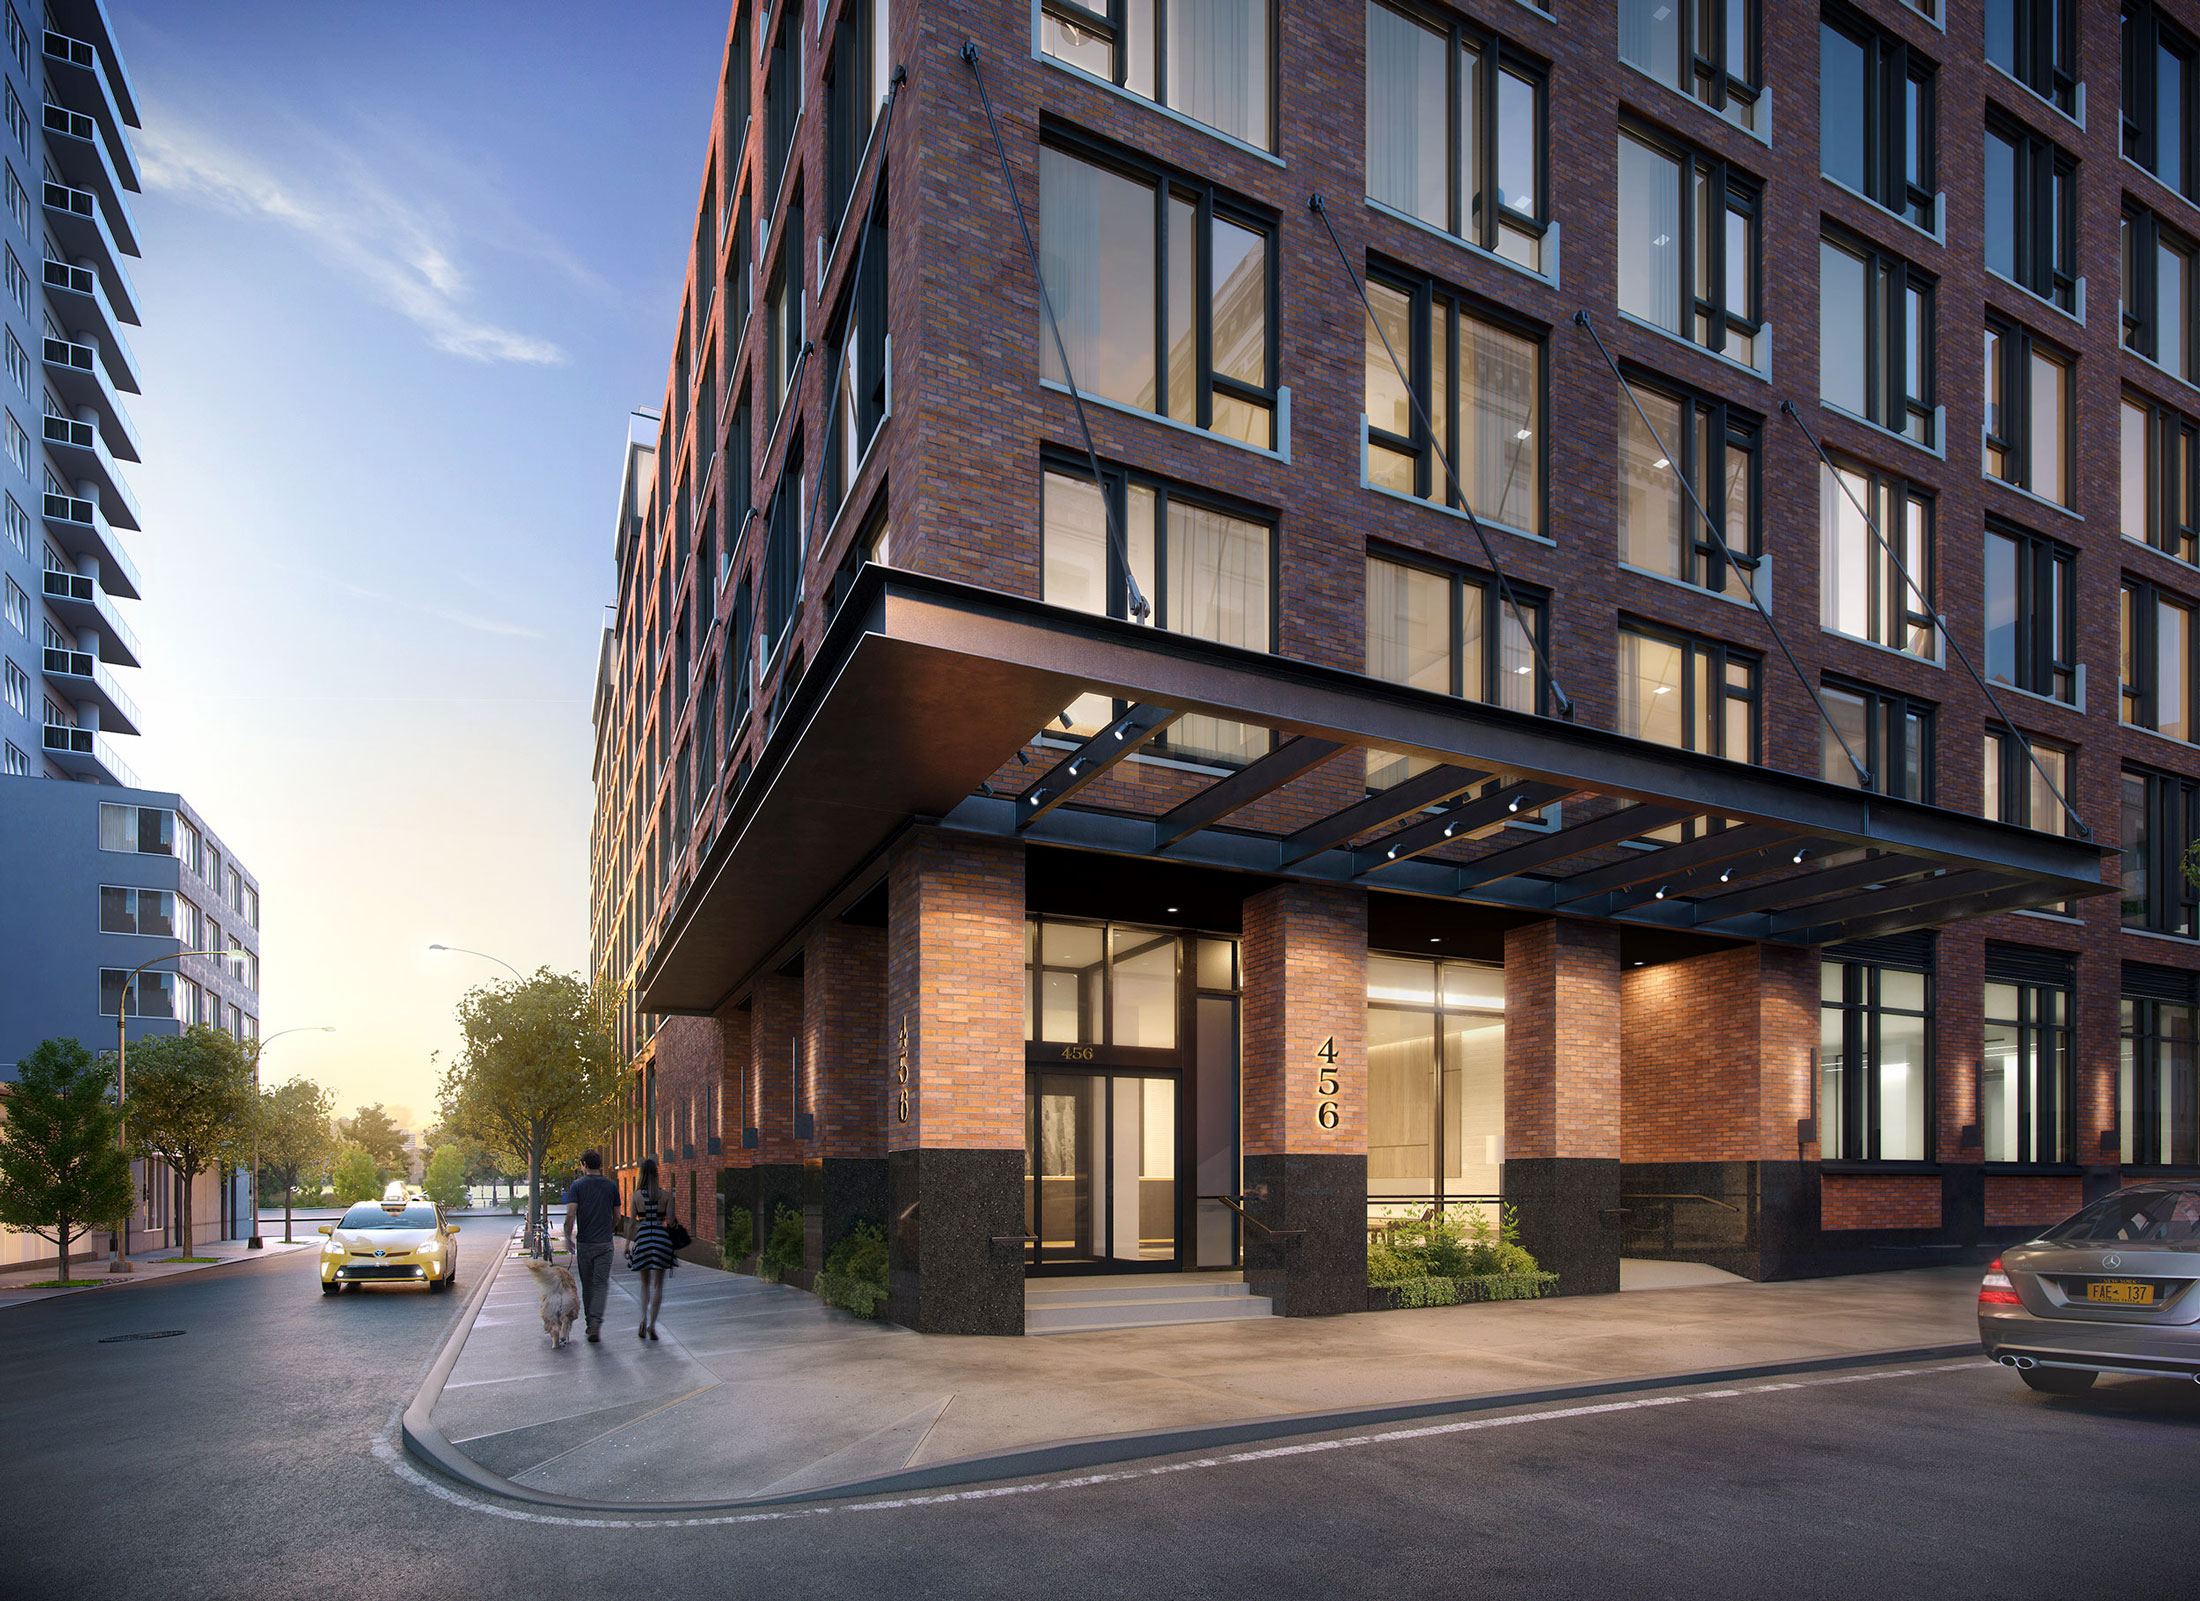 Architectural Rendering of the exterior of the 456 Washington Street project located in Tribeca, New York City